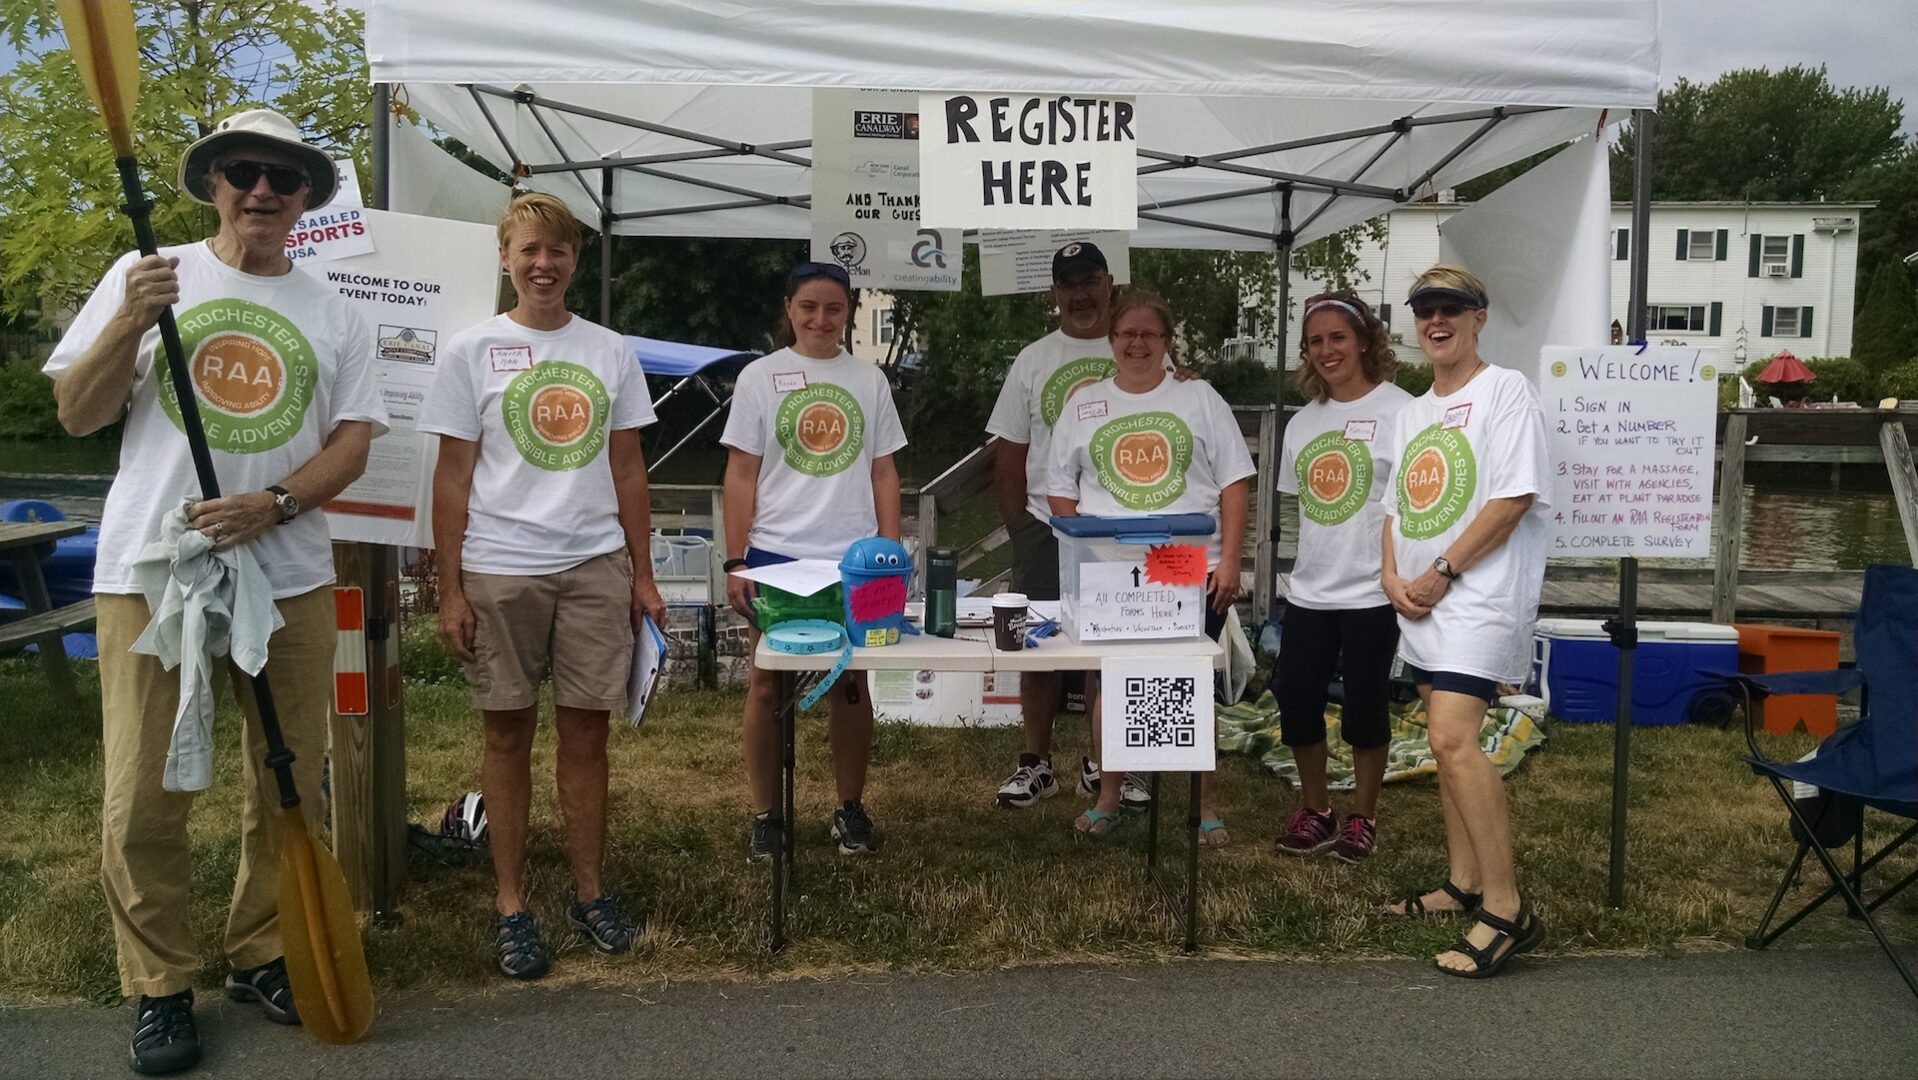 A group of seven people stand in front of a Registration table and tent at an outdoor event. All are wearing RAA tshirts, one is holding a kayak paddle.